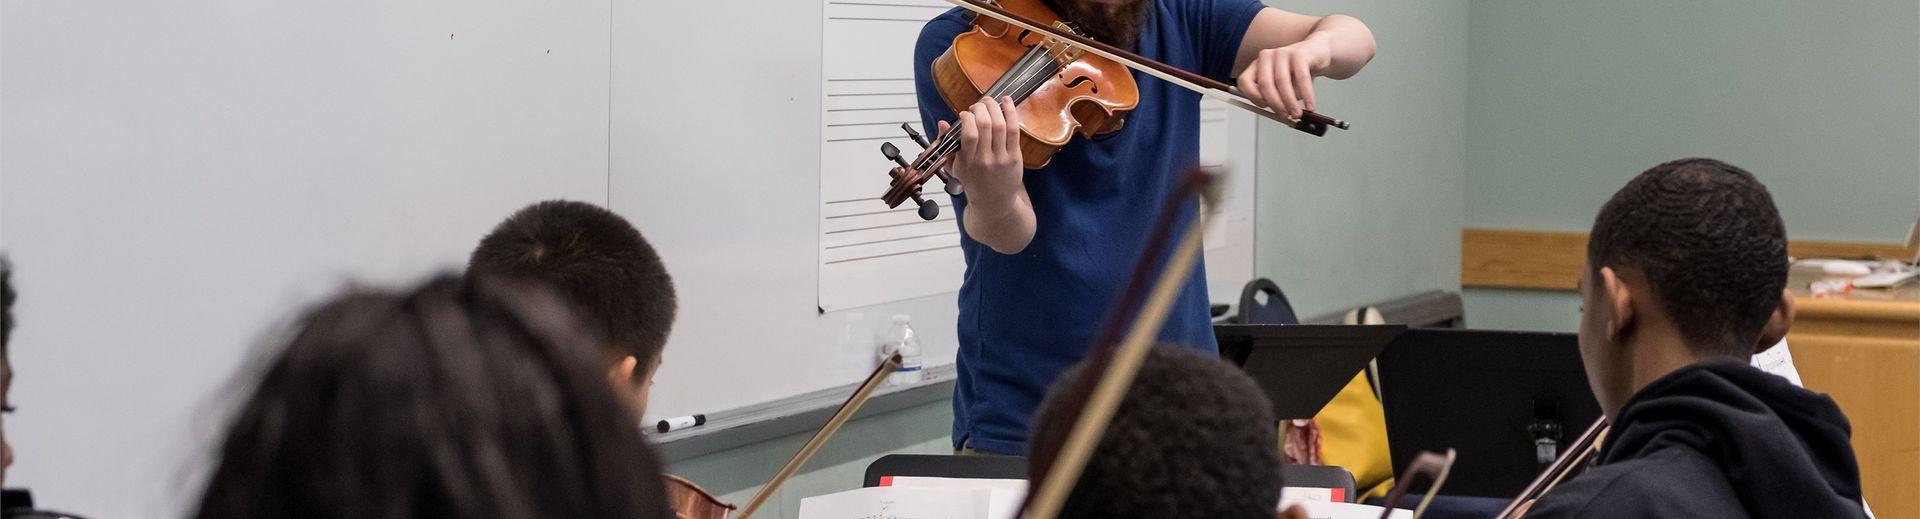 A violin teacher plays at the front of the class in front of young students.